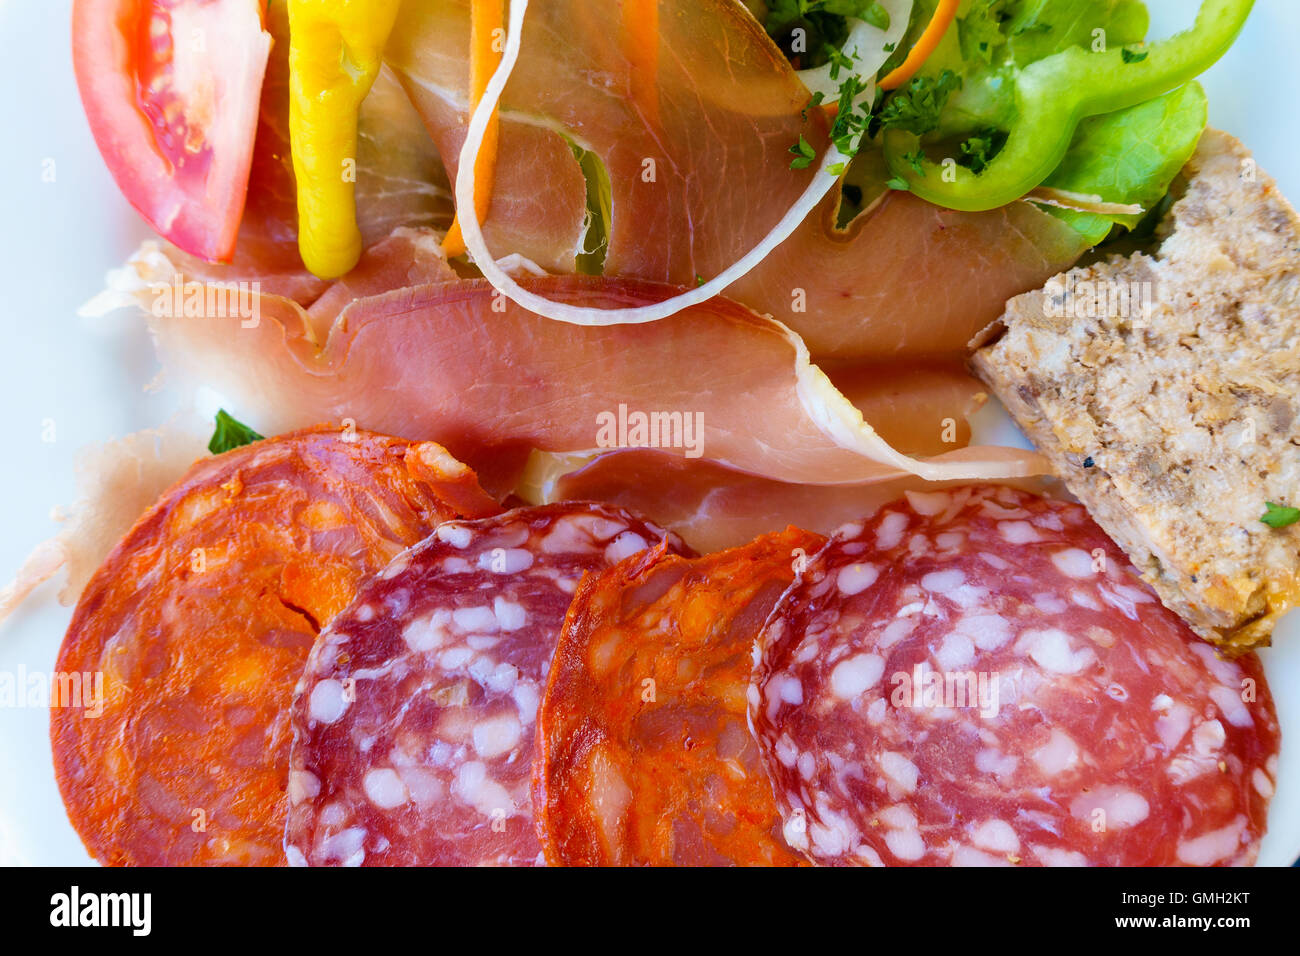 French charcuterie and salad plate Stock Photo